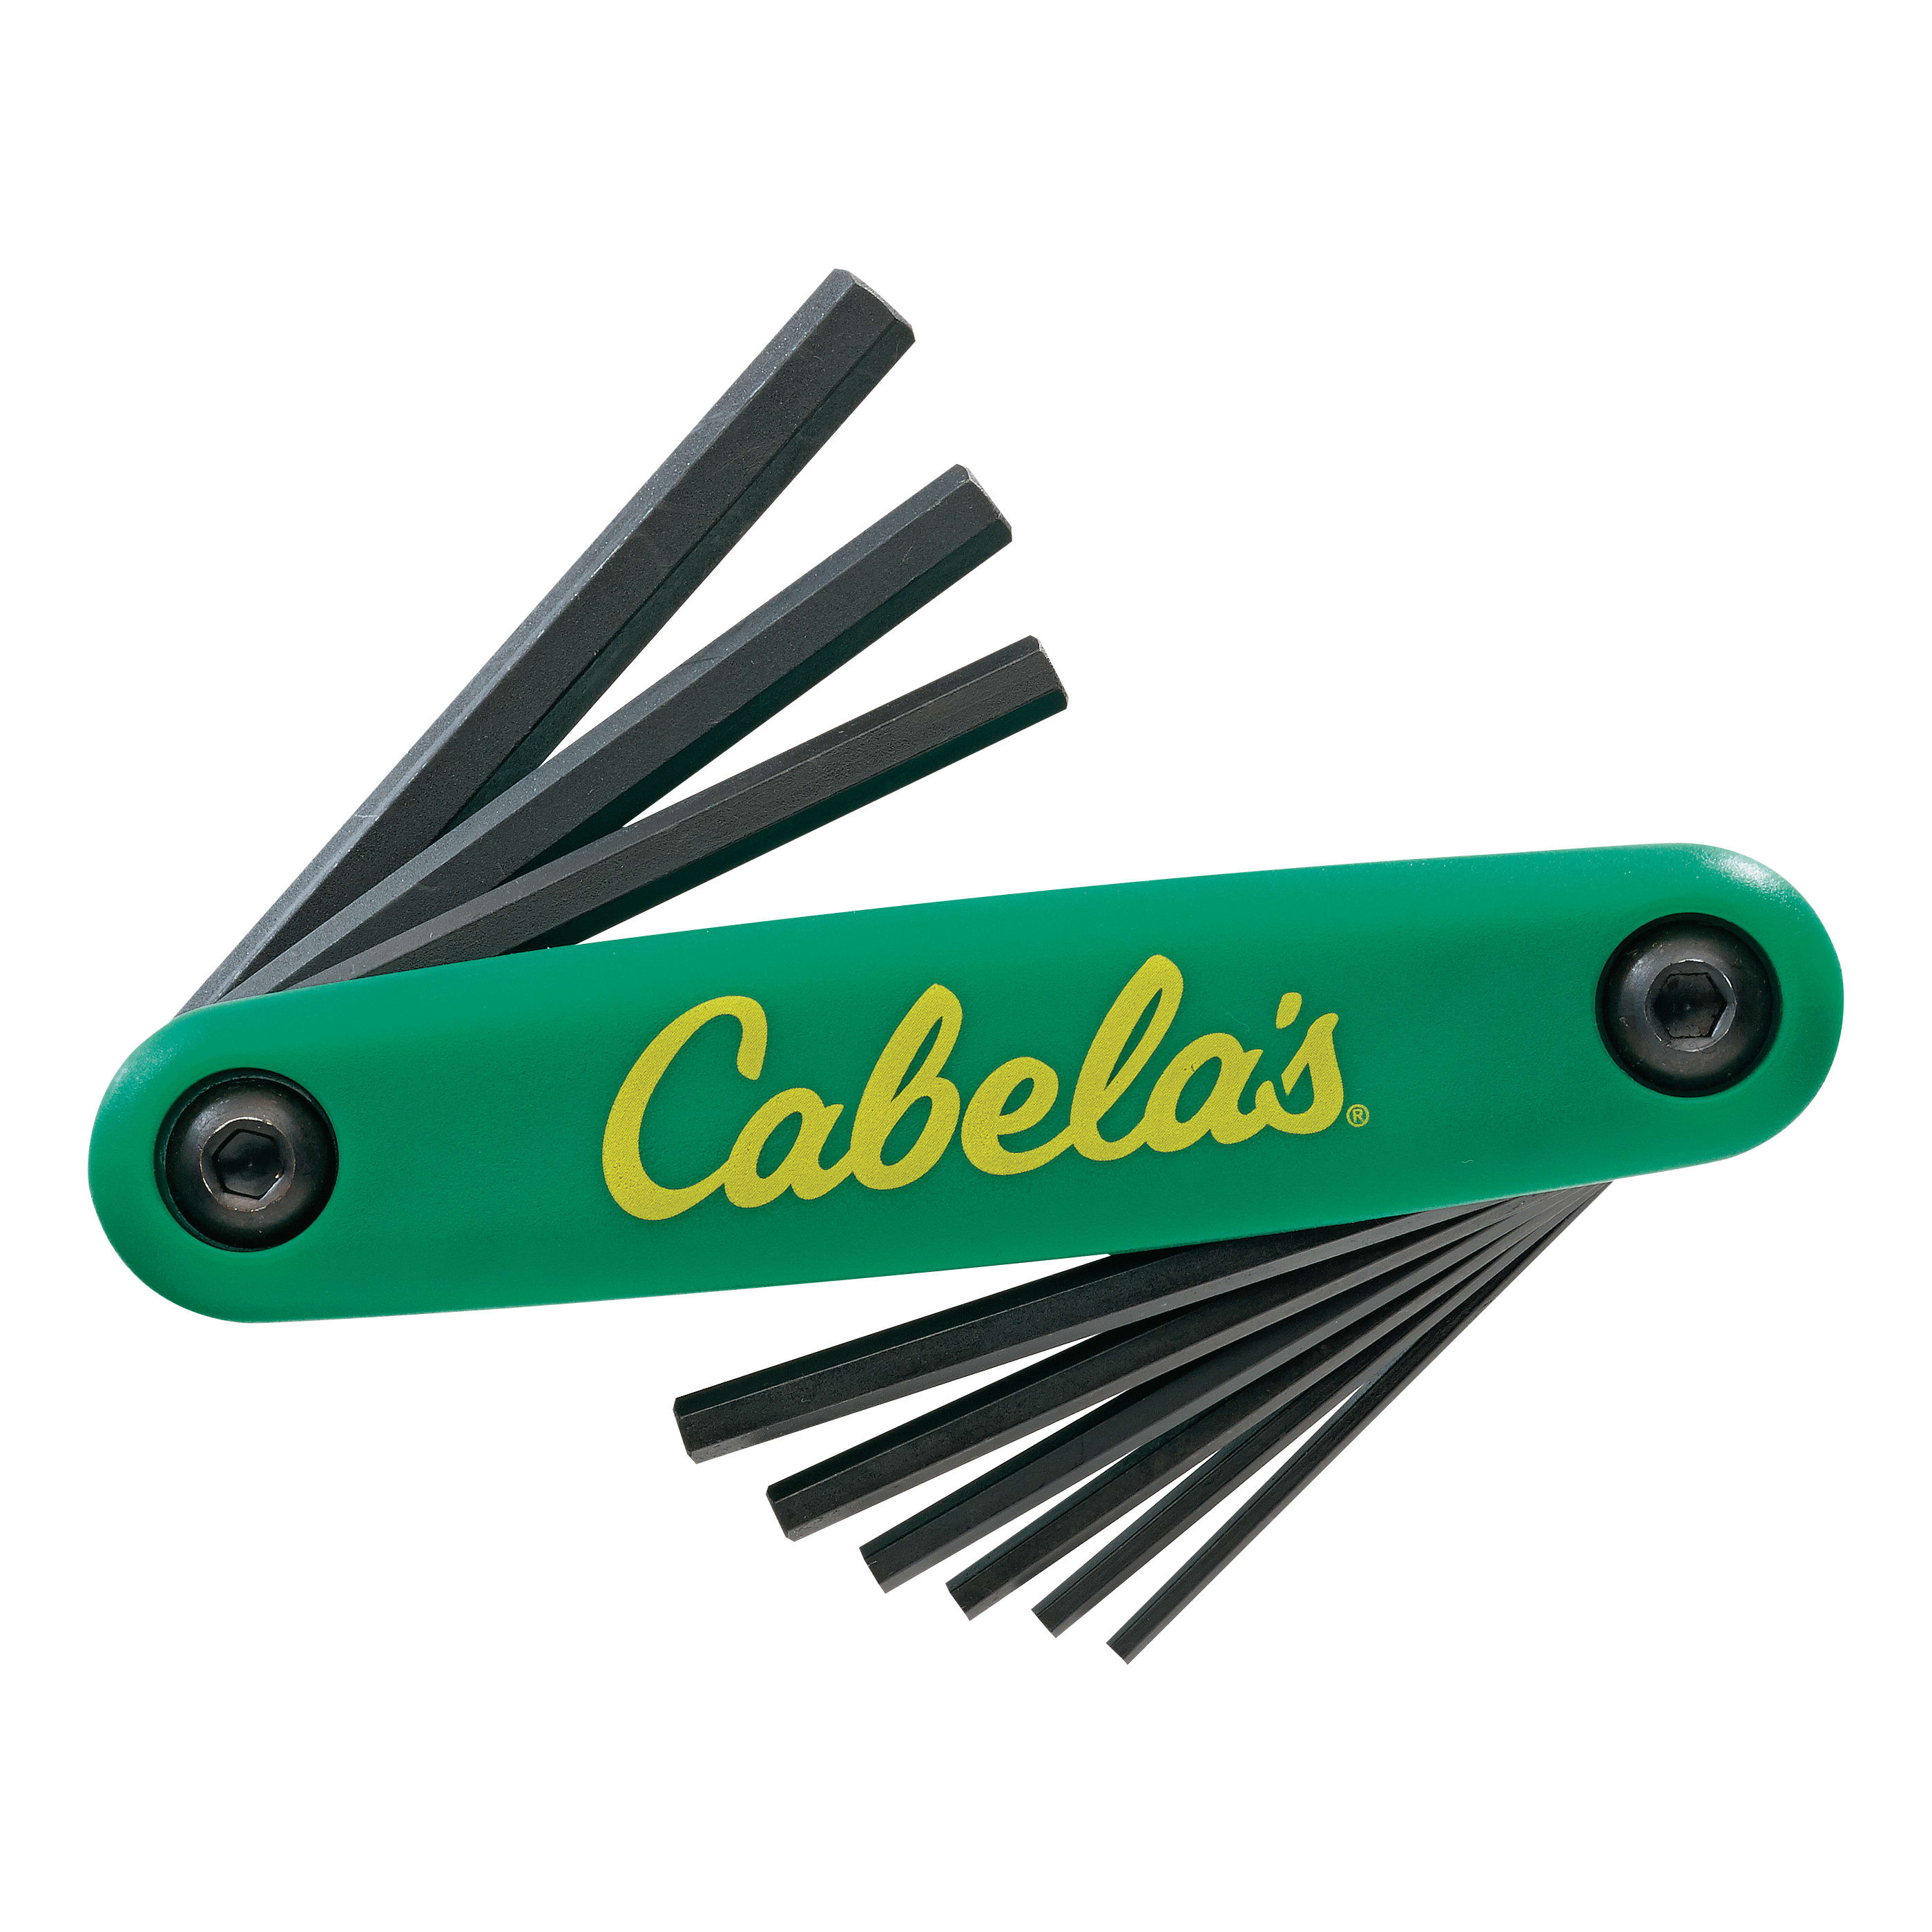 Cabela's 5/64-1/4" Hex Wrench Set